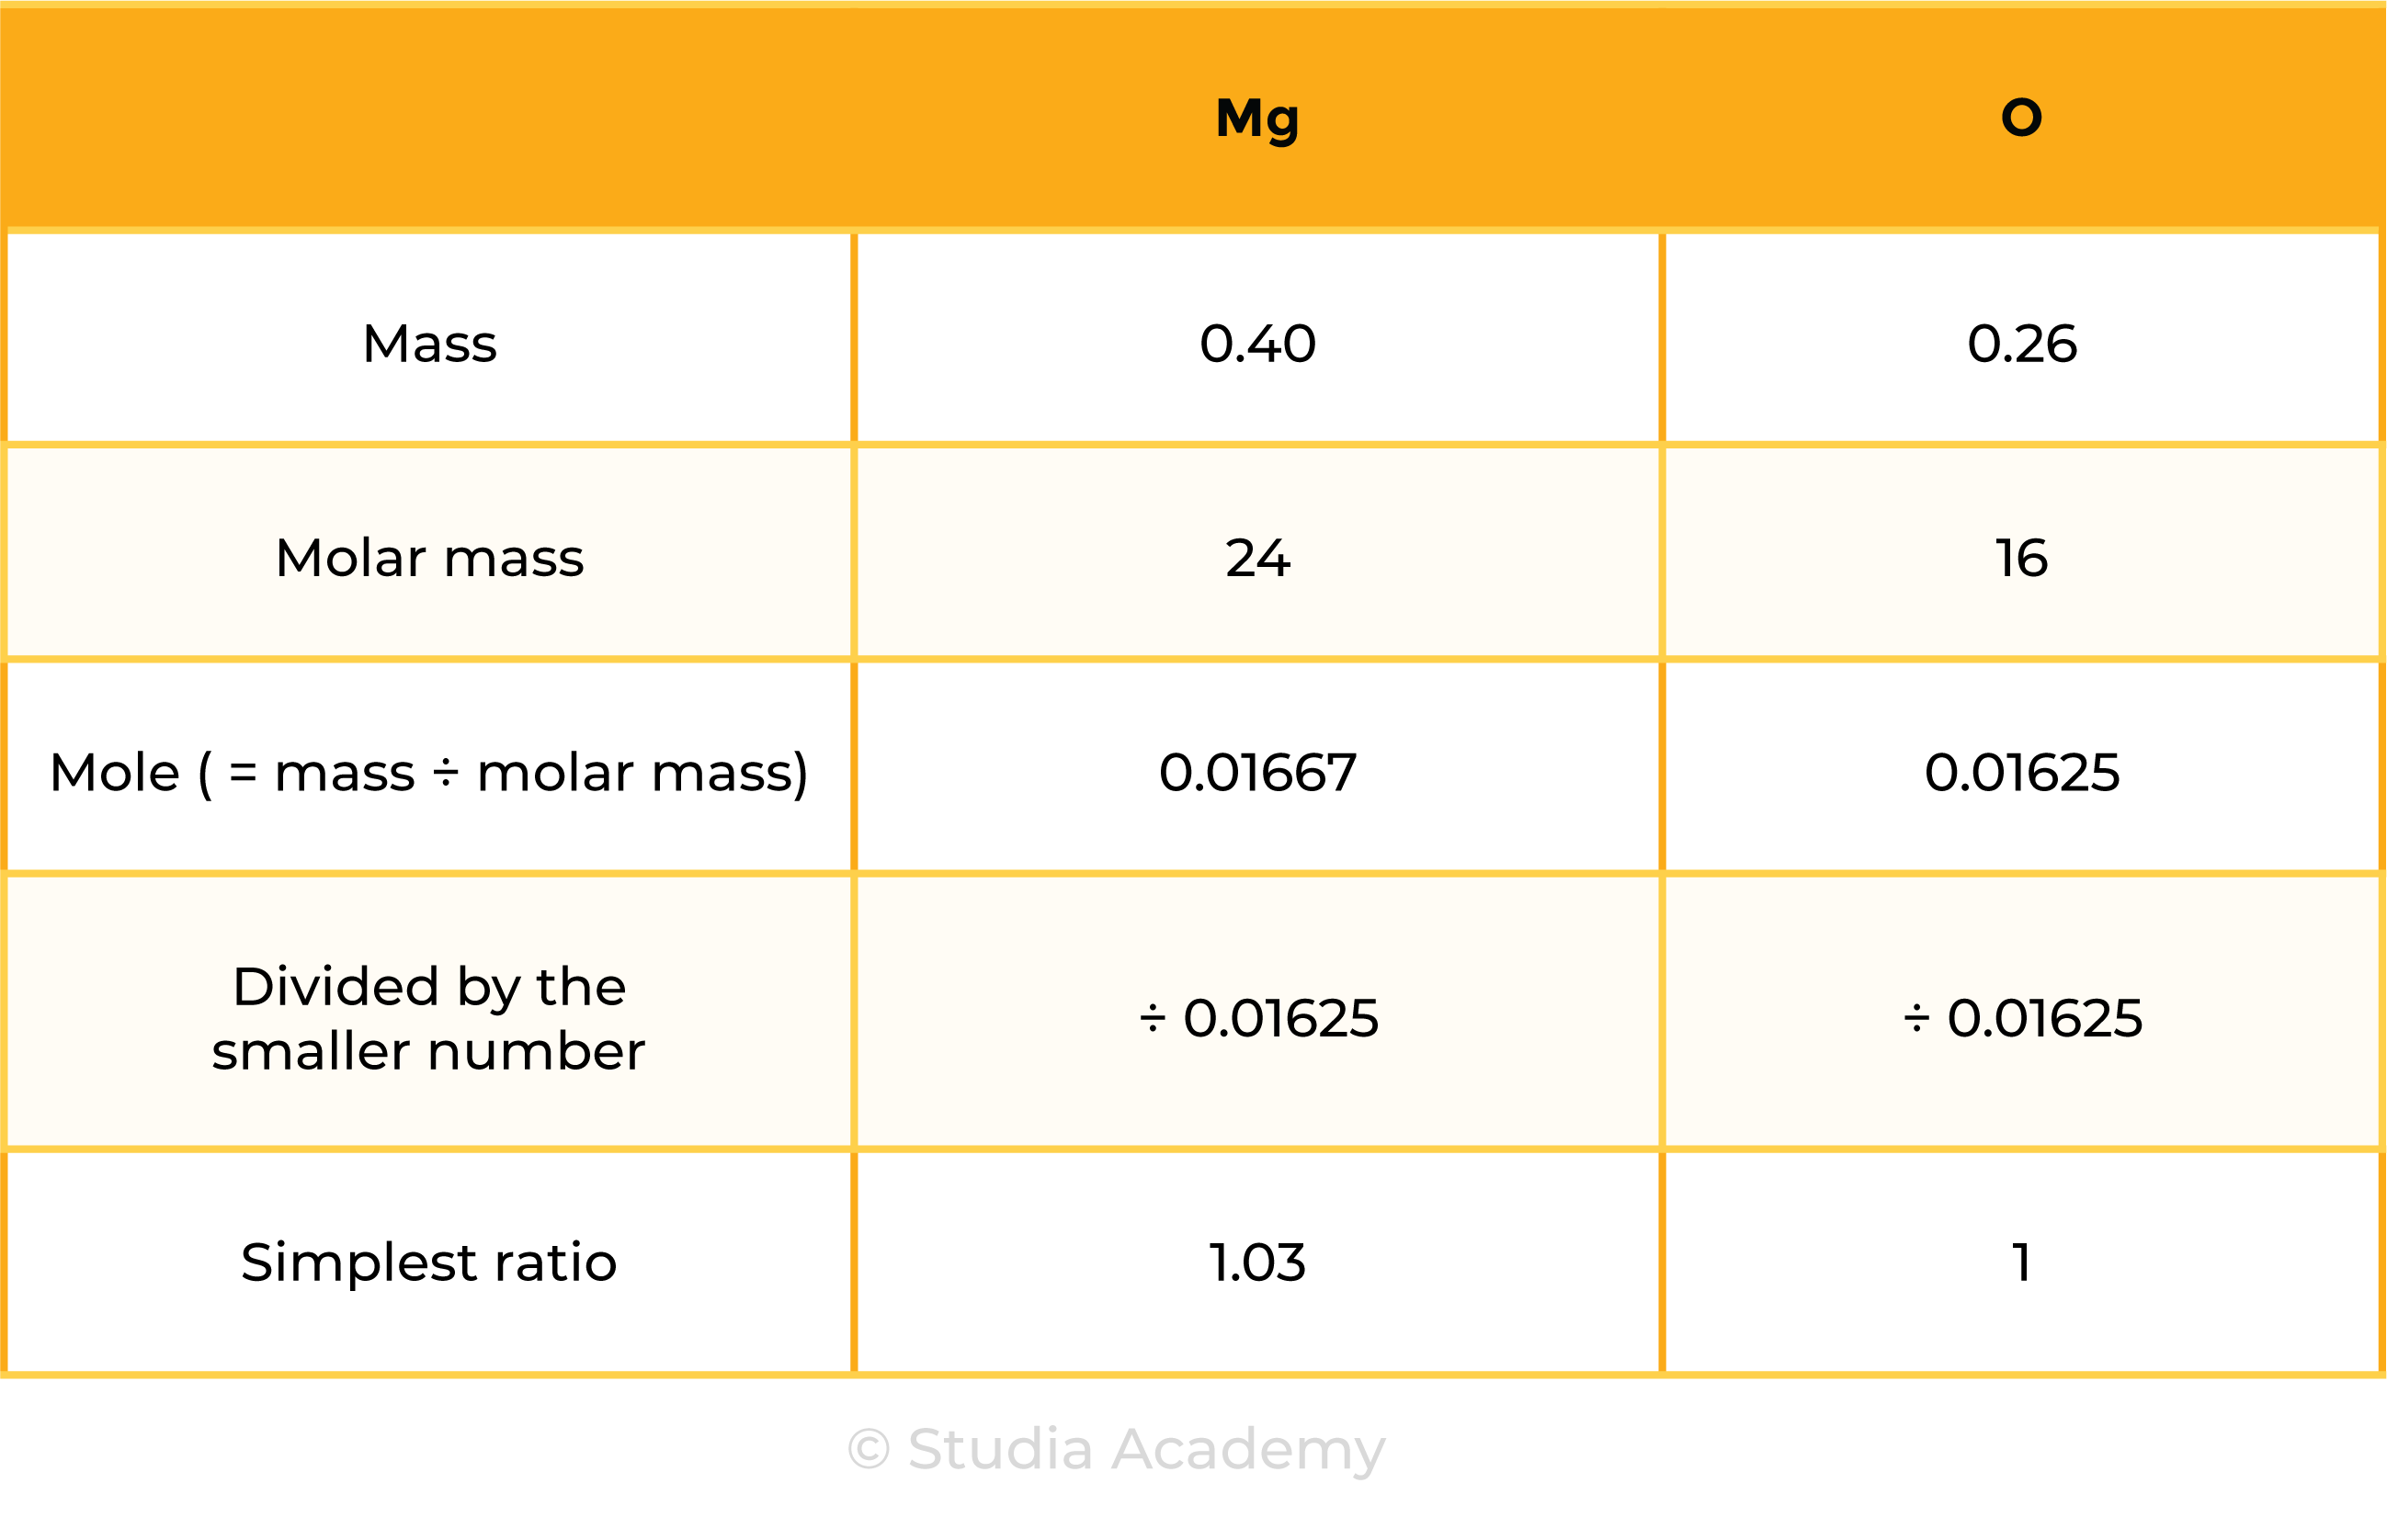 edexcel_igcse_chemistry_topic 05 tables_chemical formulae, equations, and calculations_003_mole ratio of Mg and O